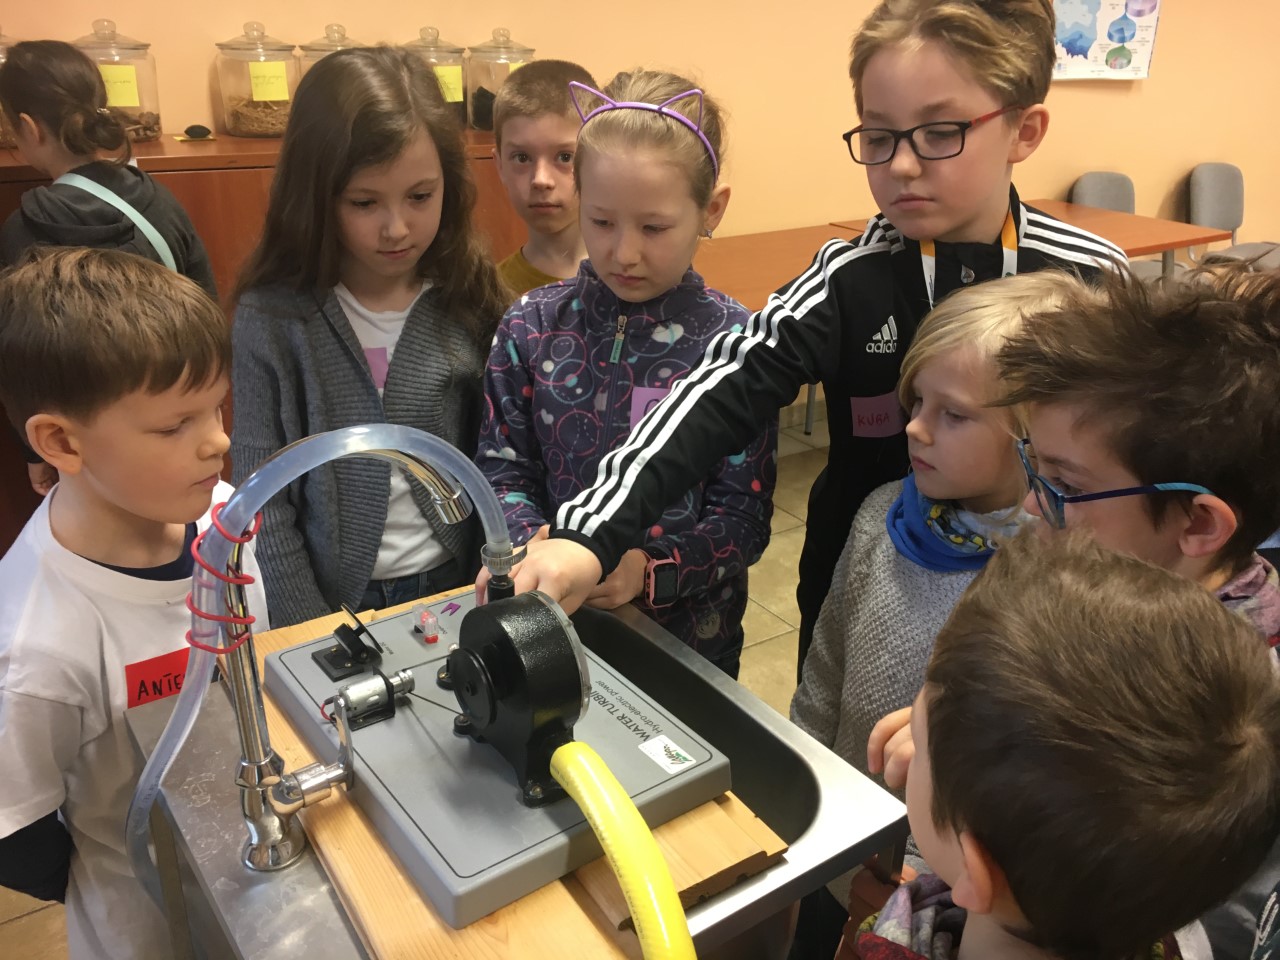 Research laboratory. A group of eight children aged around 8-10 stand around a specialized device. The tallest boy is trying to turn it on